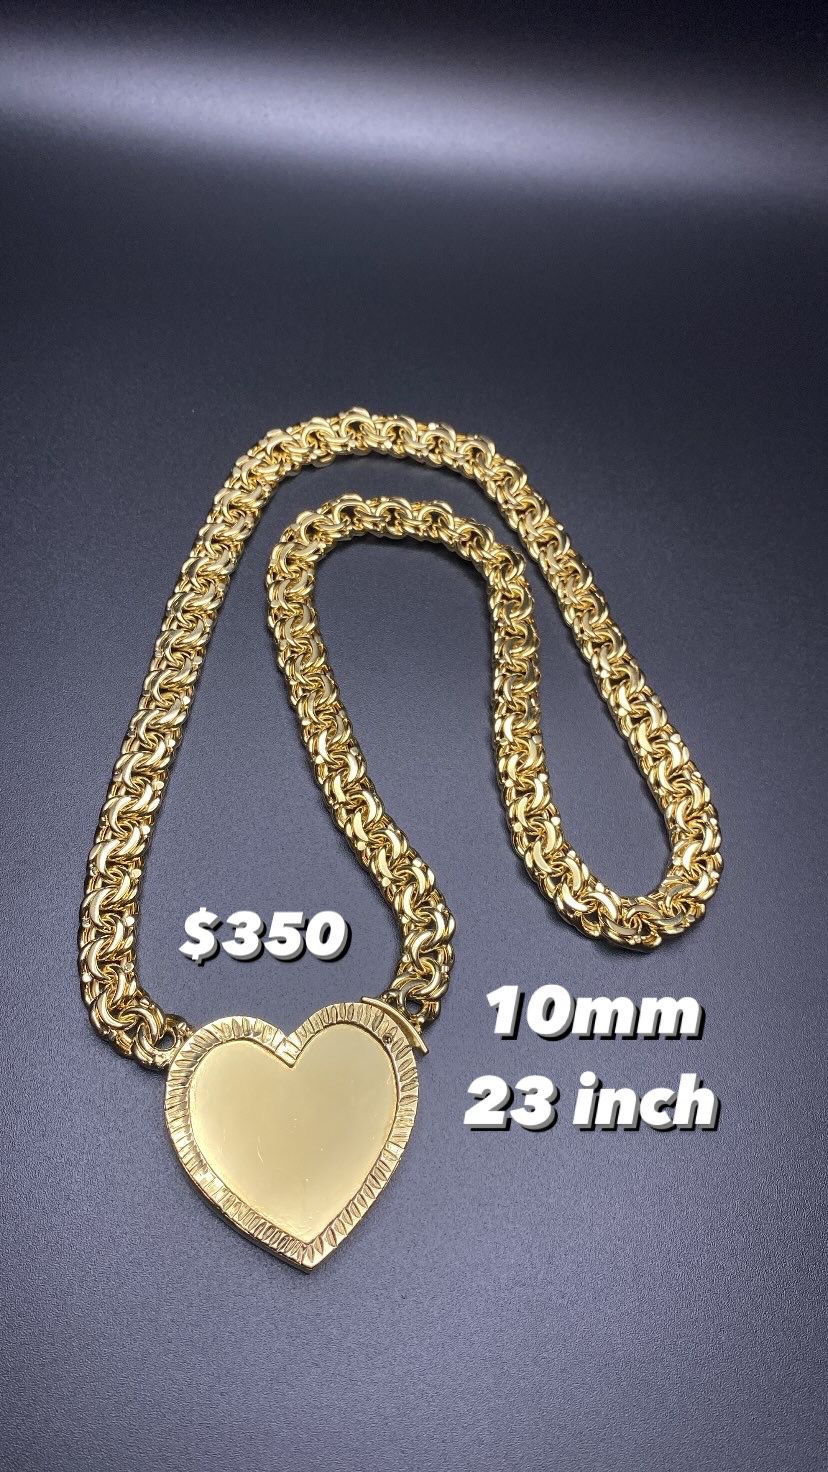 14k Gold Filled Chino Link Heart Chains